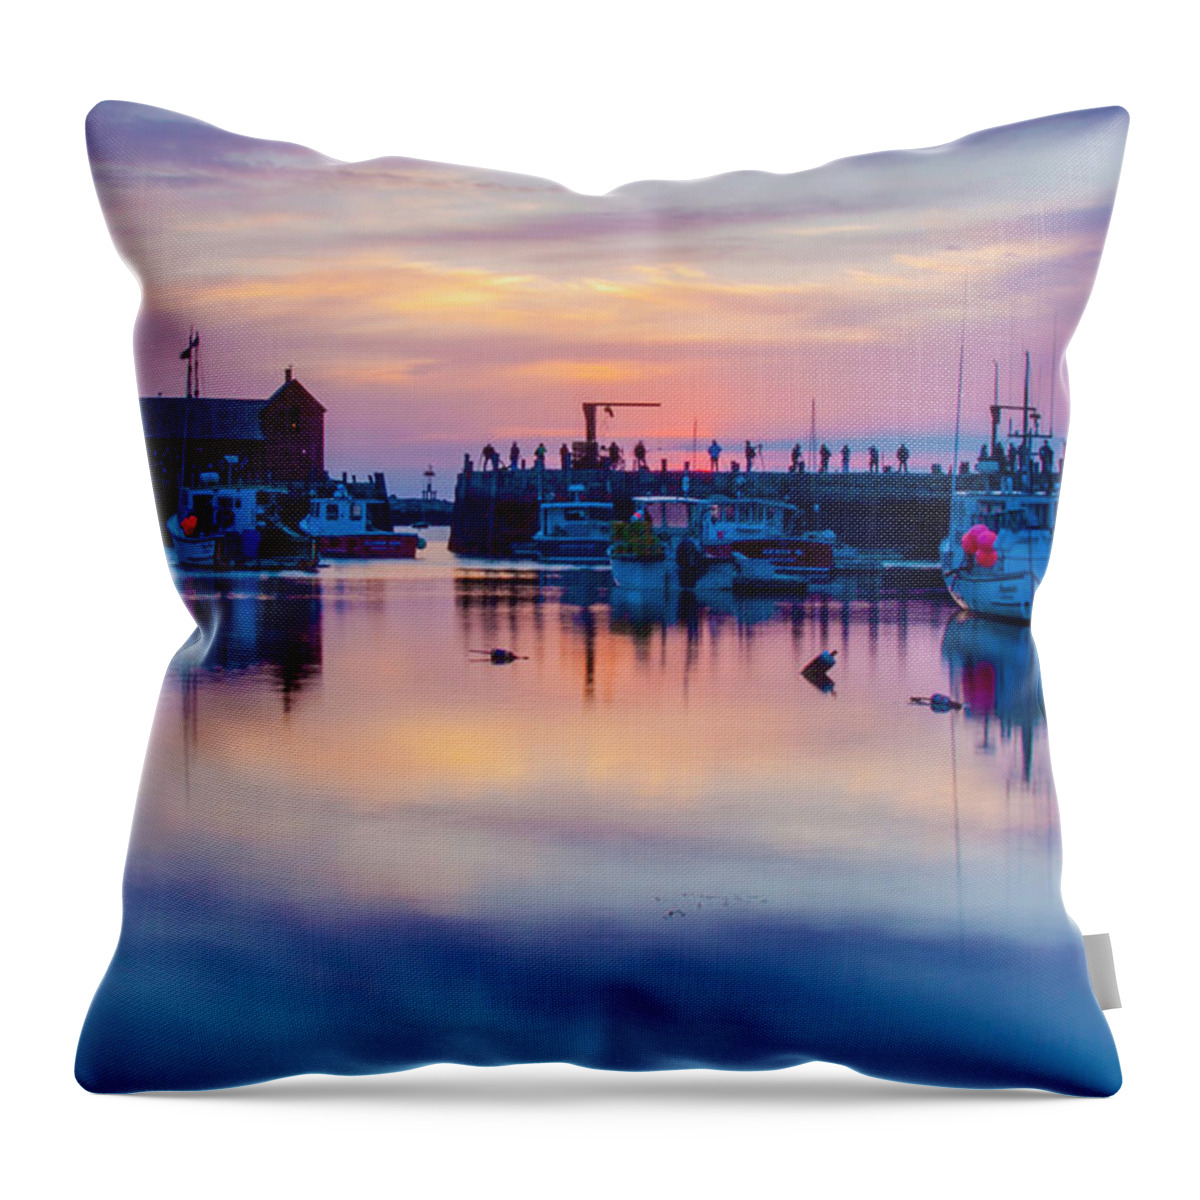 Motif #1 Throw Pillow featuring the photograph Rockport harbor sunrise over Motif #1 by Jeff Folger